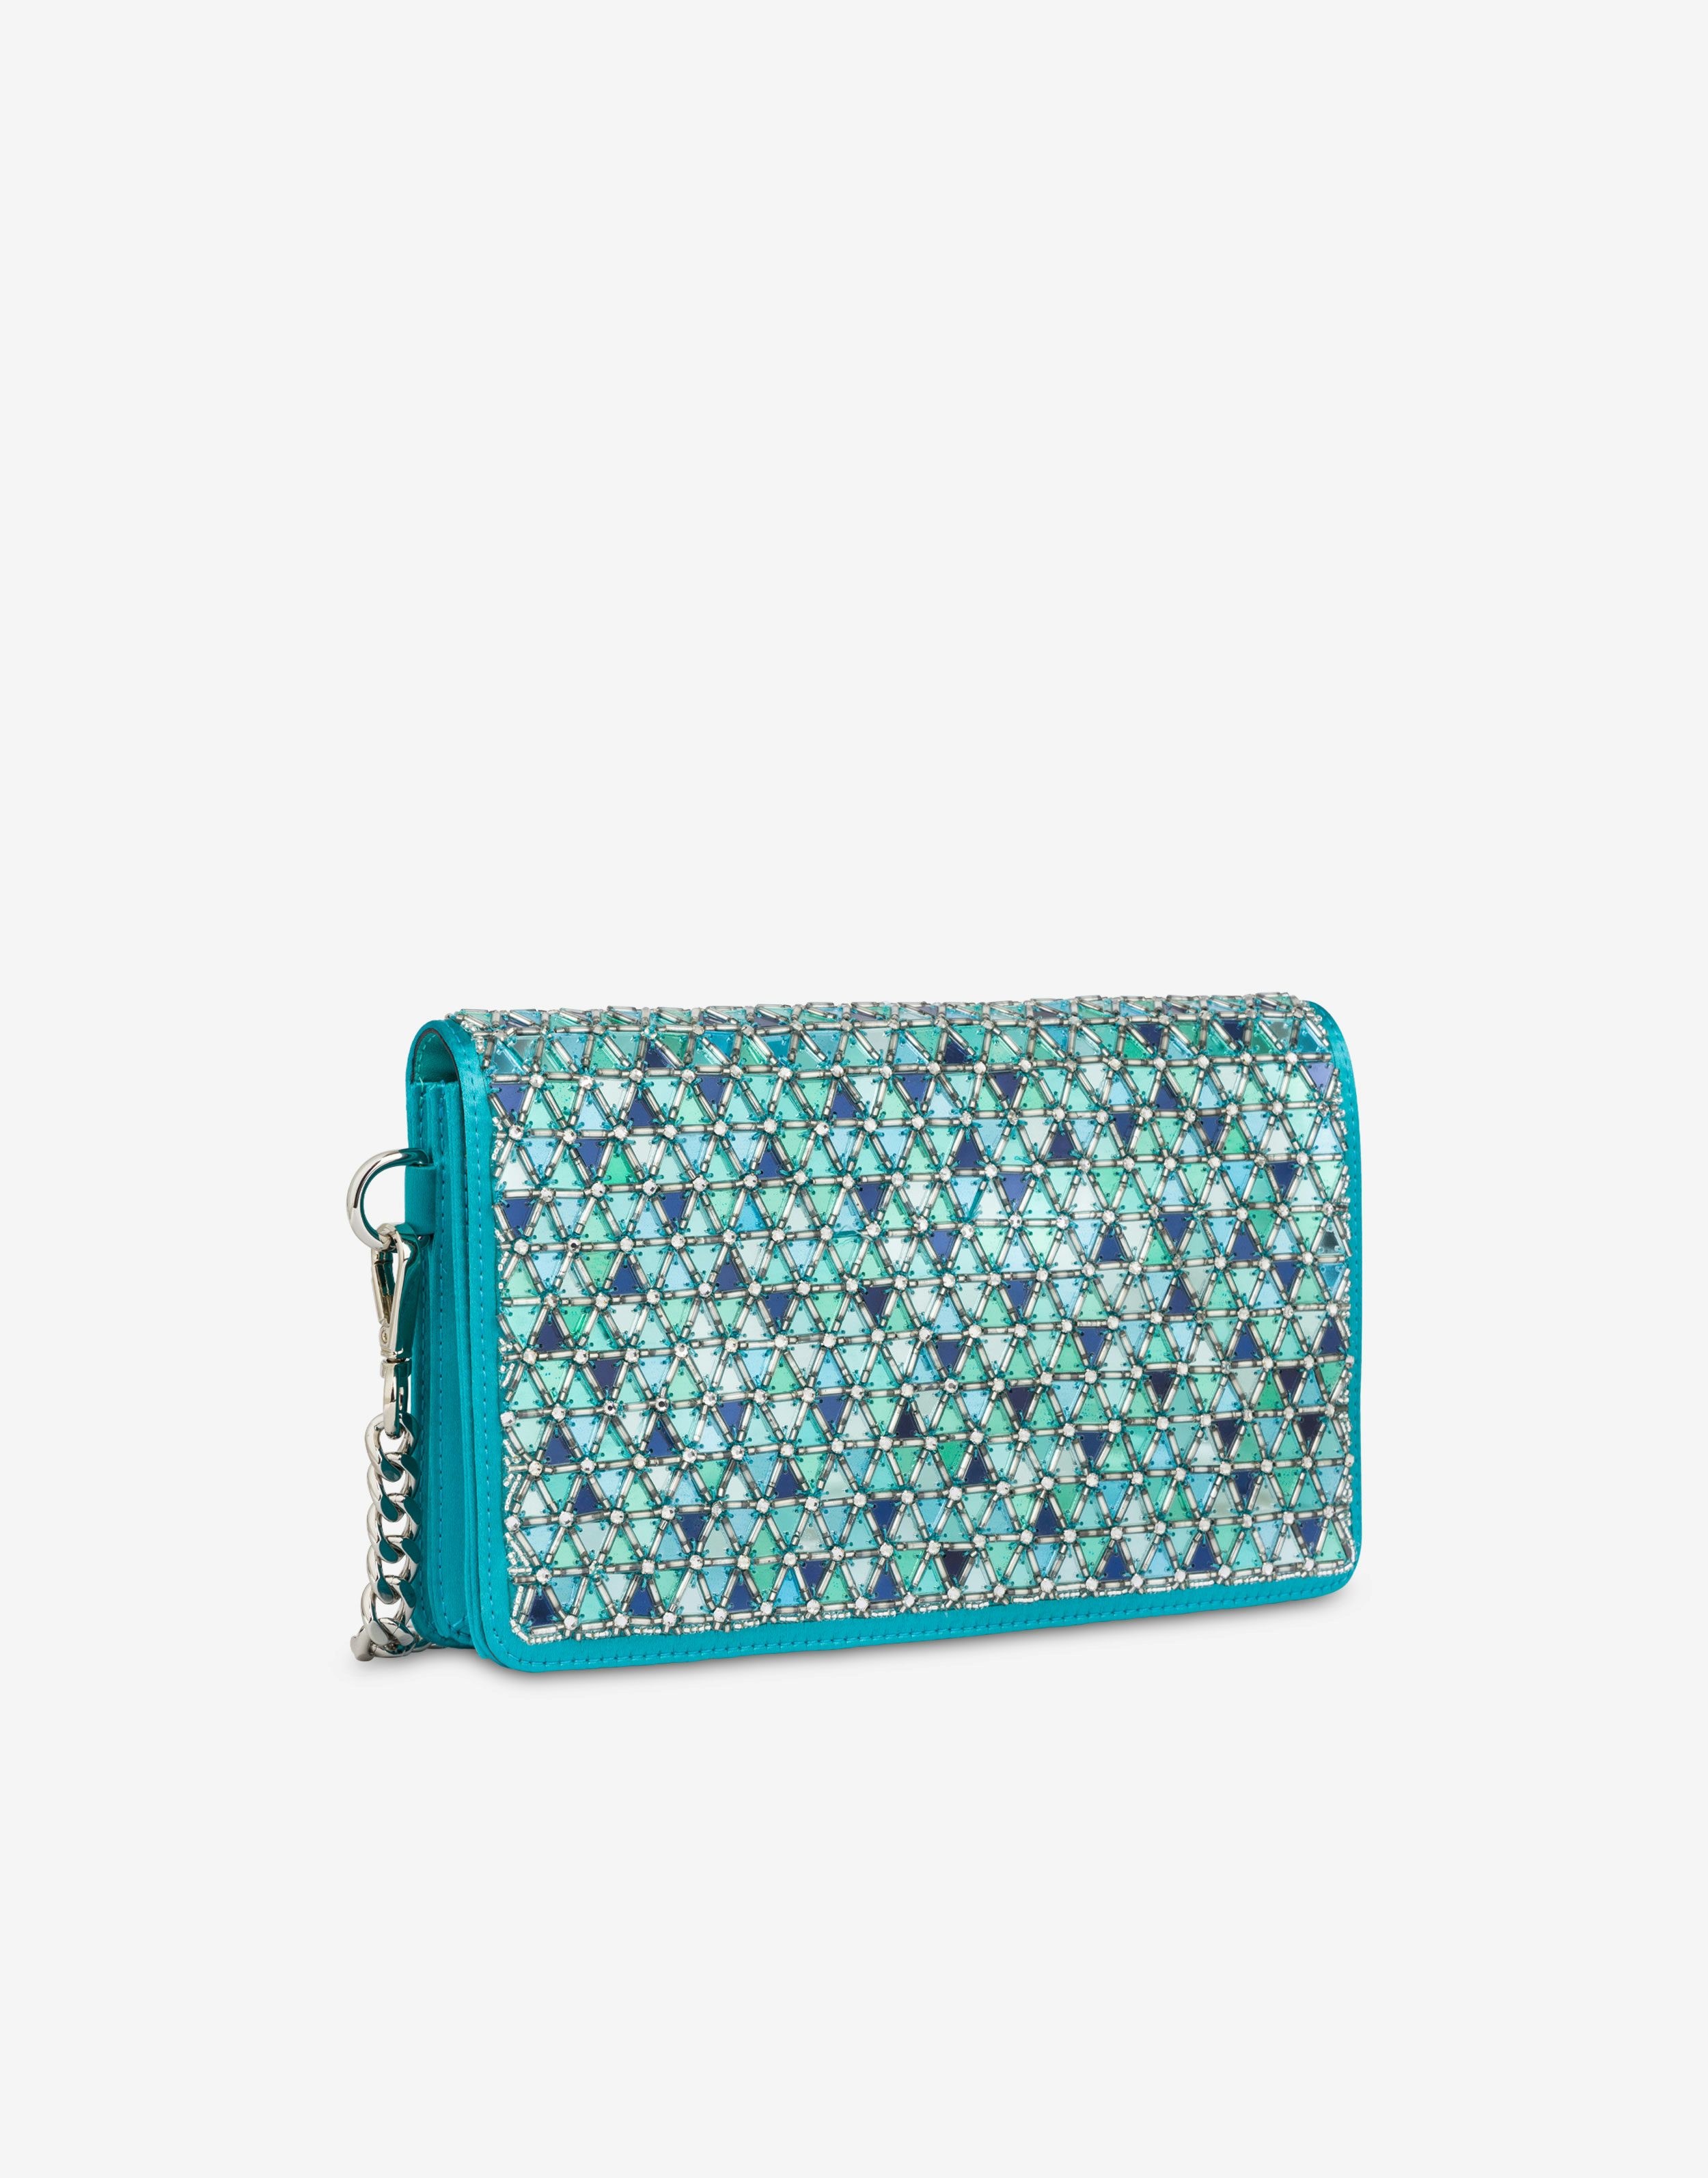 Satin clutch with mosaic embroidery